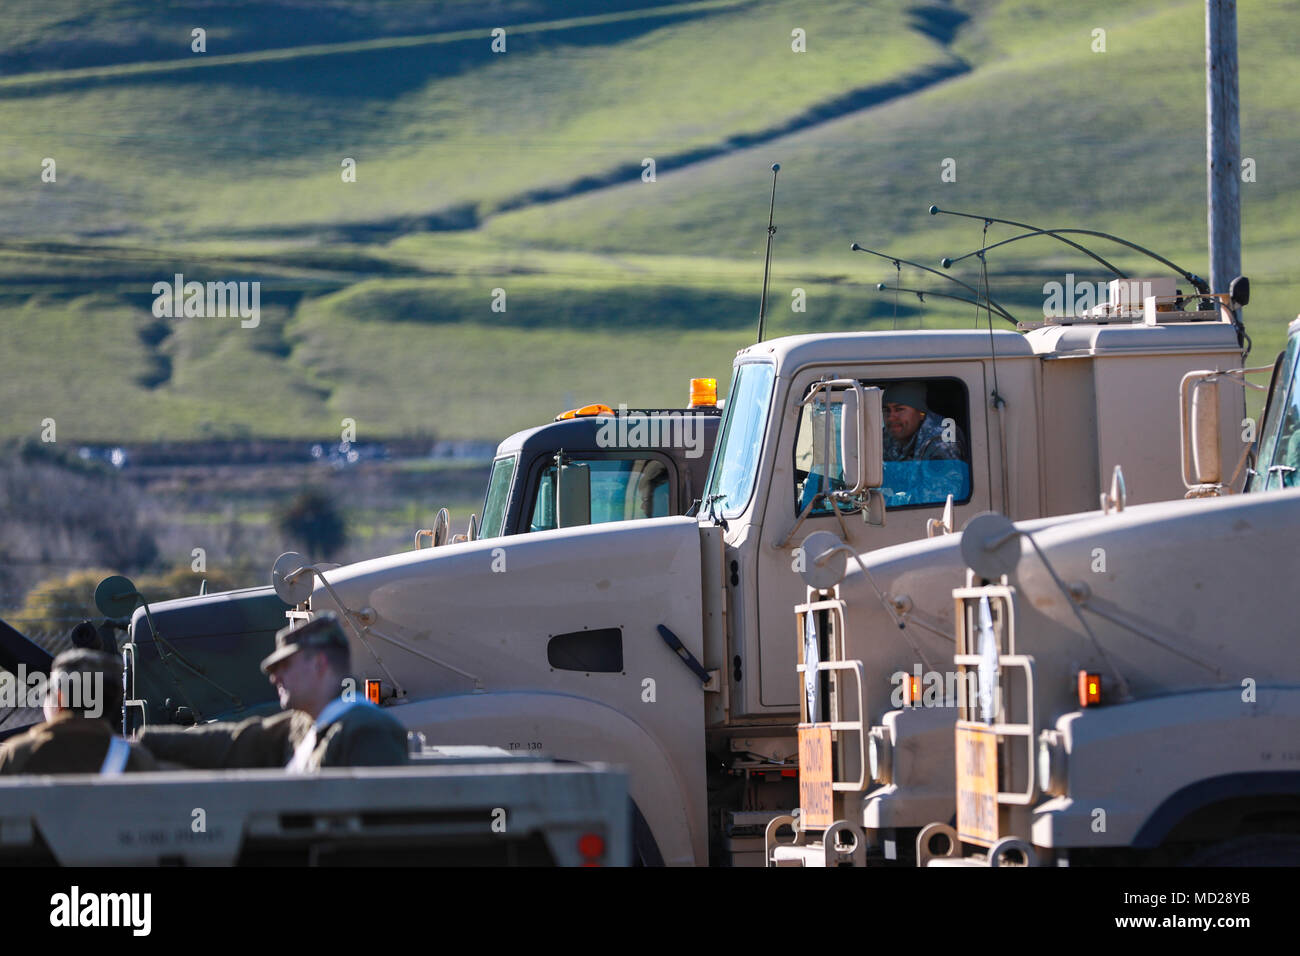 U.S. Army Reserve Soldiers prepare to conduct convoy operations during Operation Patriot Bandolier at Military Ocean Terminal Concord, California, Mar. 2, 2018. Operation Patriot Bandolier is a real-world strategic mission utilizing U.S. Army Reserve, National Guard and Active component Soldiers transport Army materiel and munitions containers across the U.S.     (U.S. Army photo by Sgt. Eben Boothby) Stock Photo